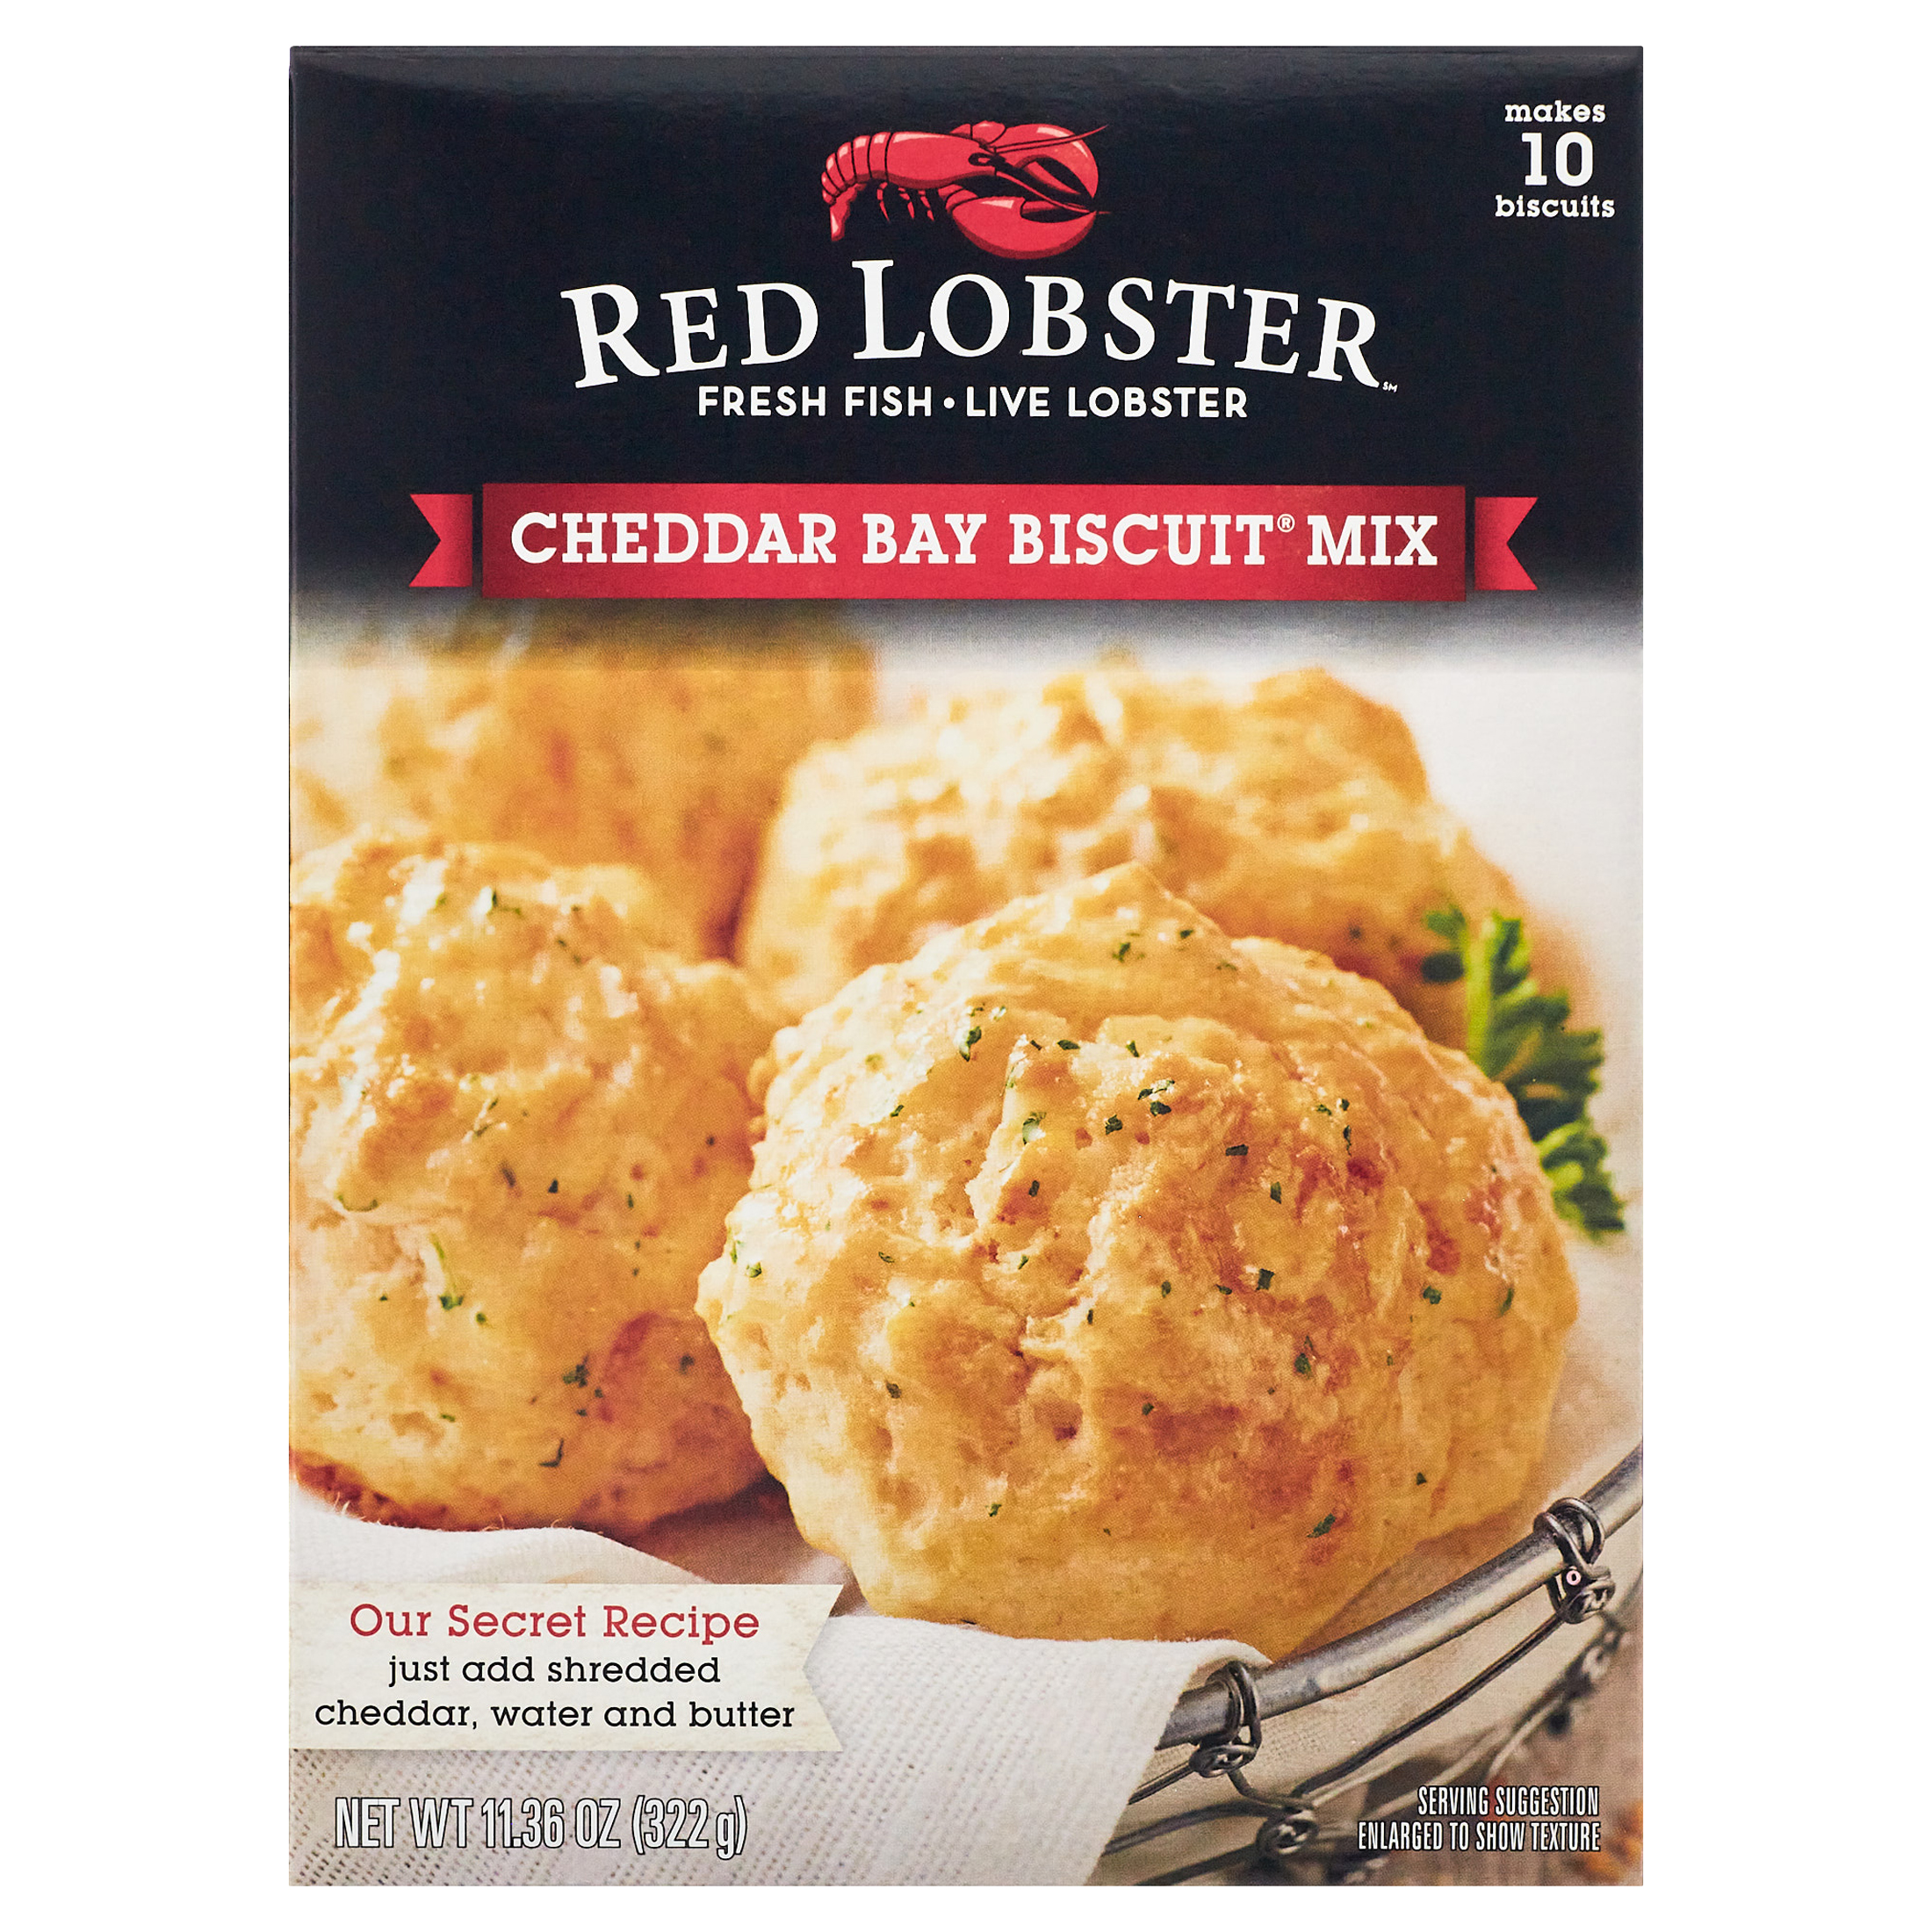 Red Lobster Cheddar Bay Biscuit Mix, Makes 10 Biscuits, 11.36 oz Box - image 1 of 10